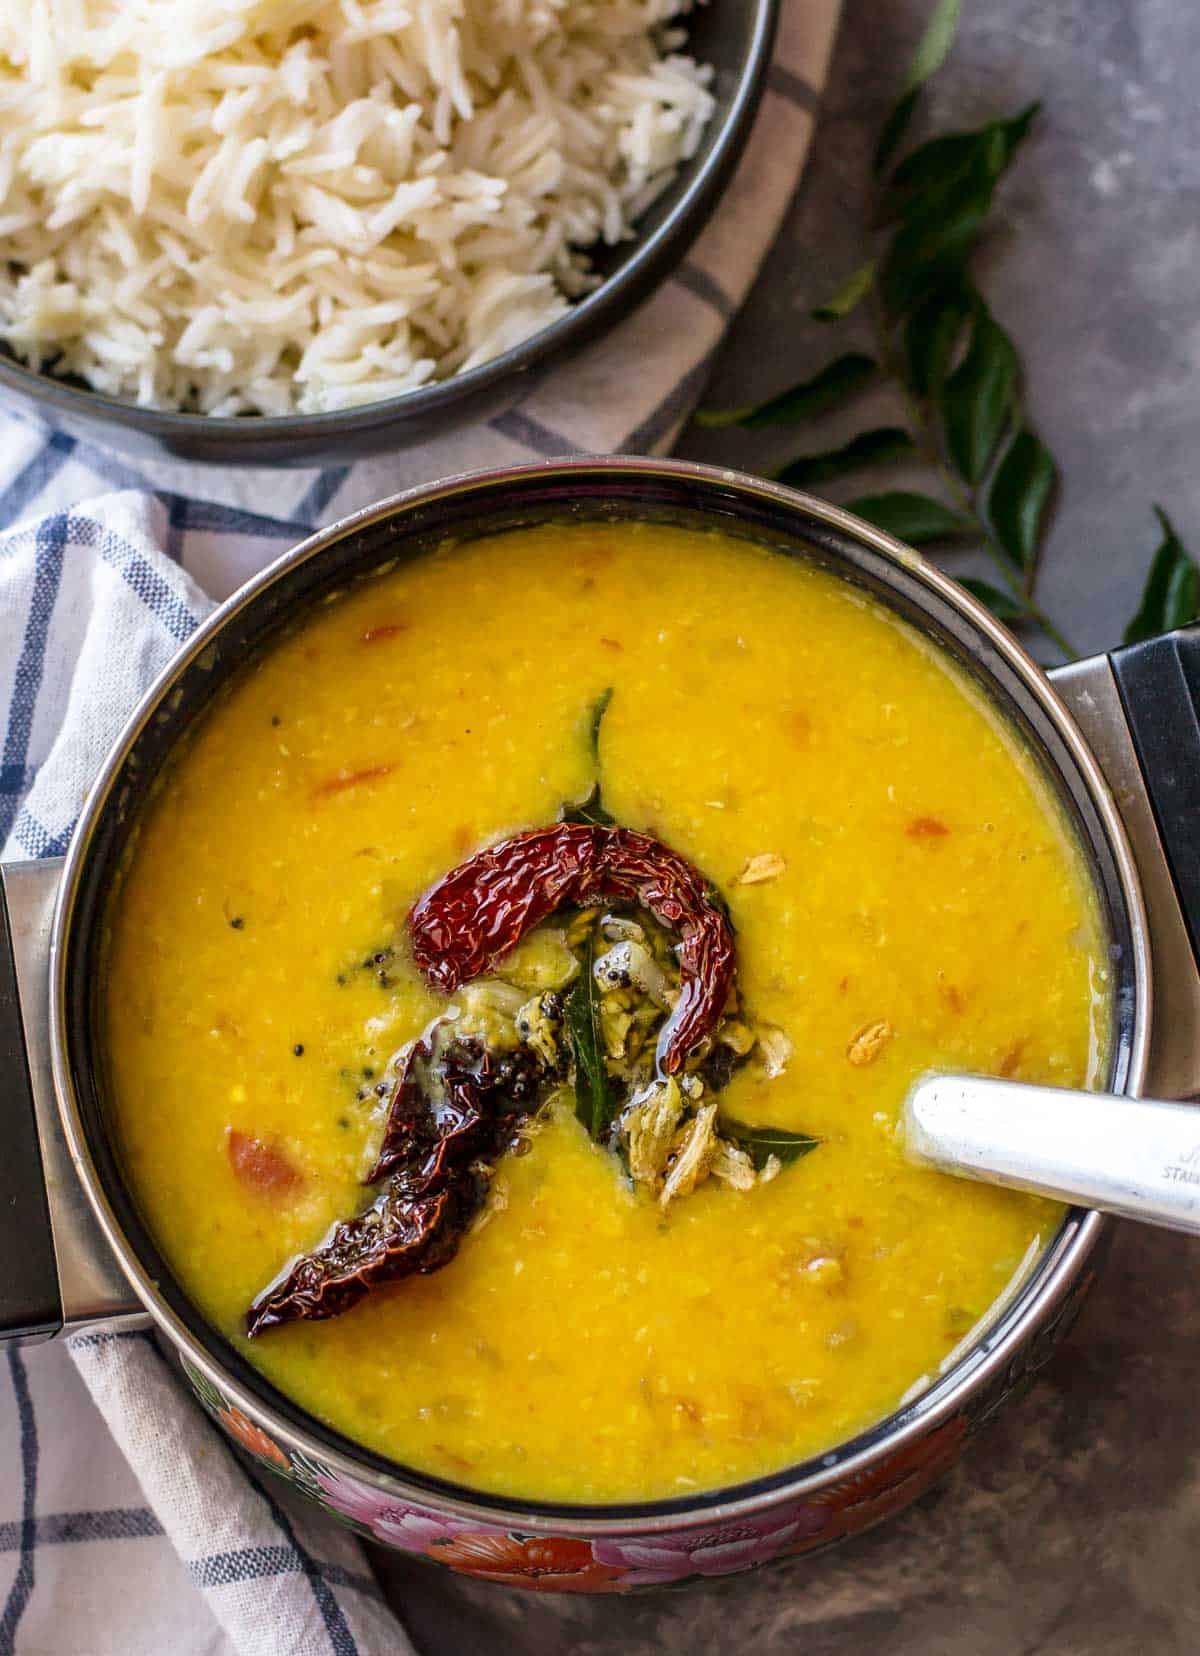 One pot recipes are the best! That's why you'll love this Tadka dal recipe - make it in an Instant Pot or a pressure cooker - and you'll have your meal ready in no time.